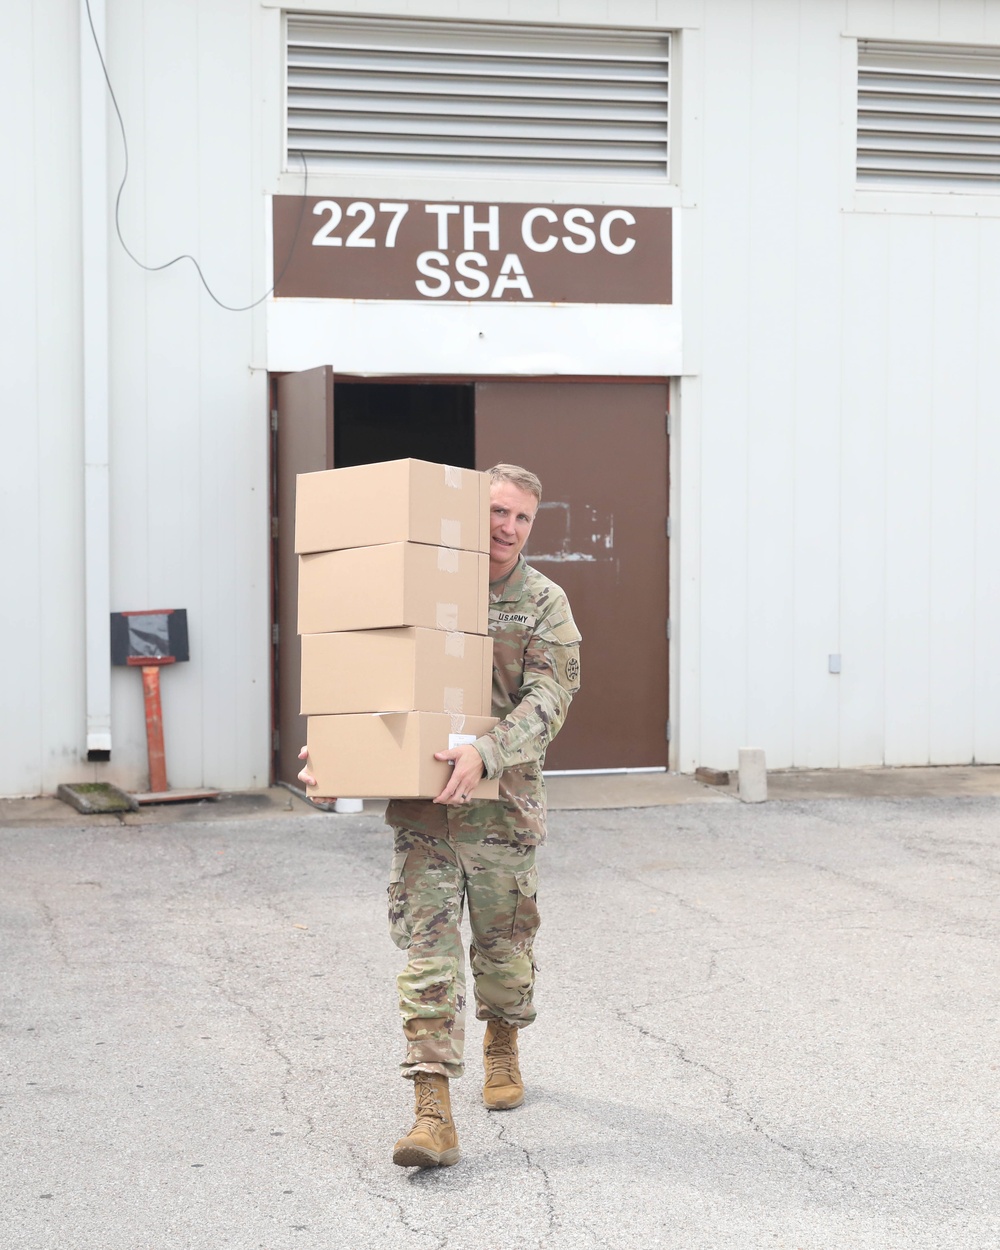 Pallets of Coffee Donated to Fort Campbell Ministry Teams